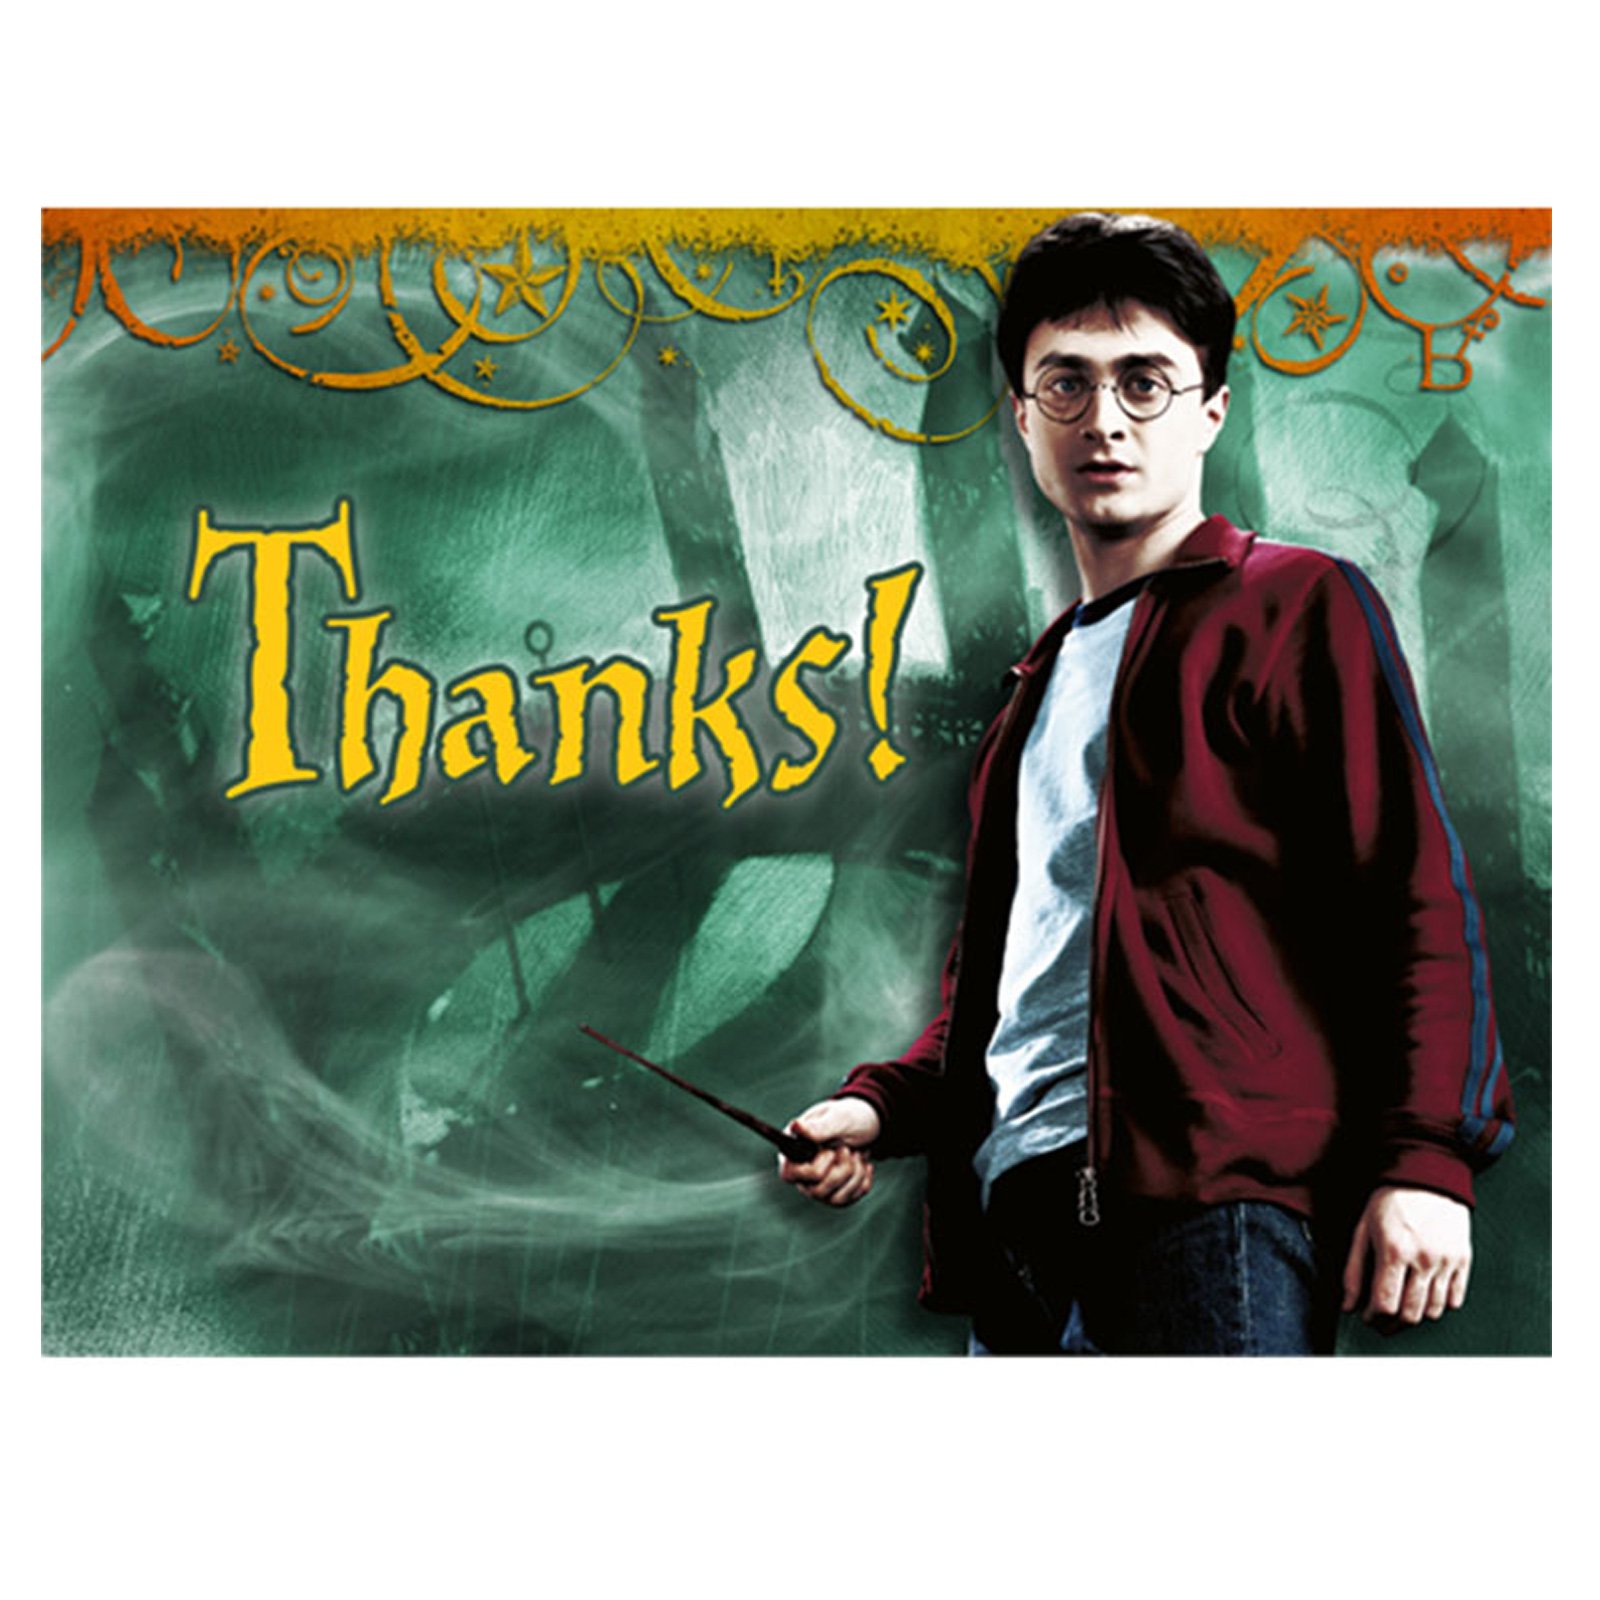 Harry Potter Deathly Hallows Thank You Cards (8 count)